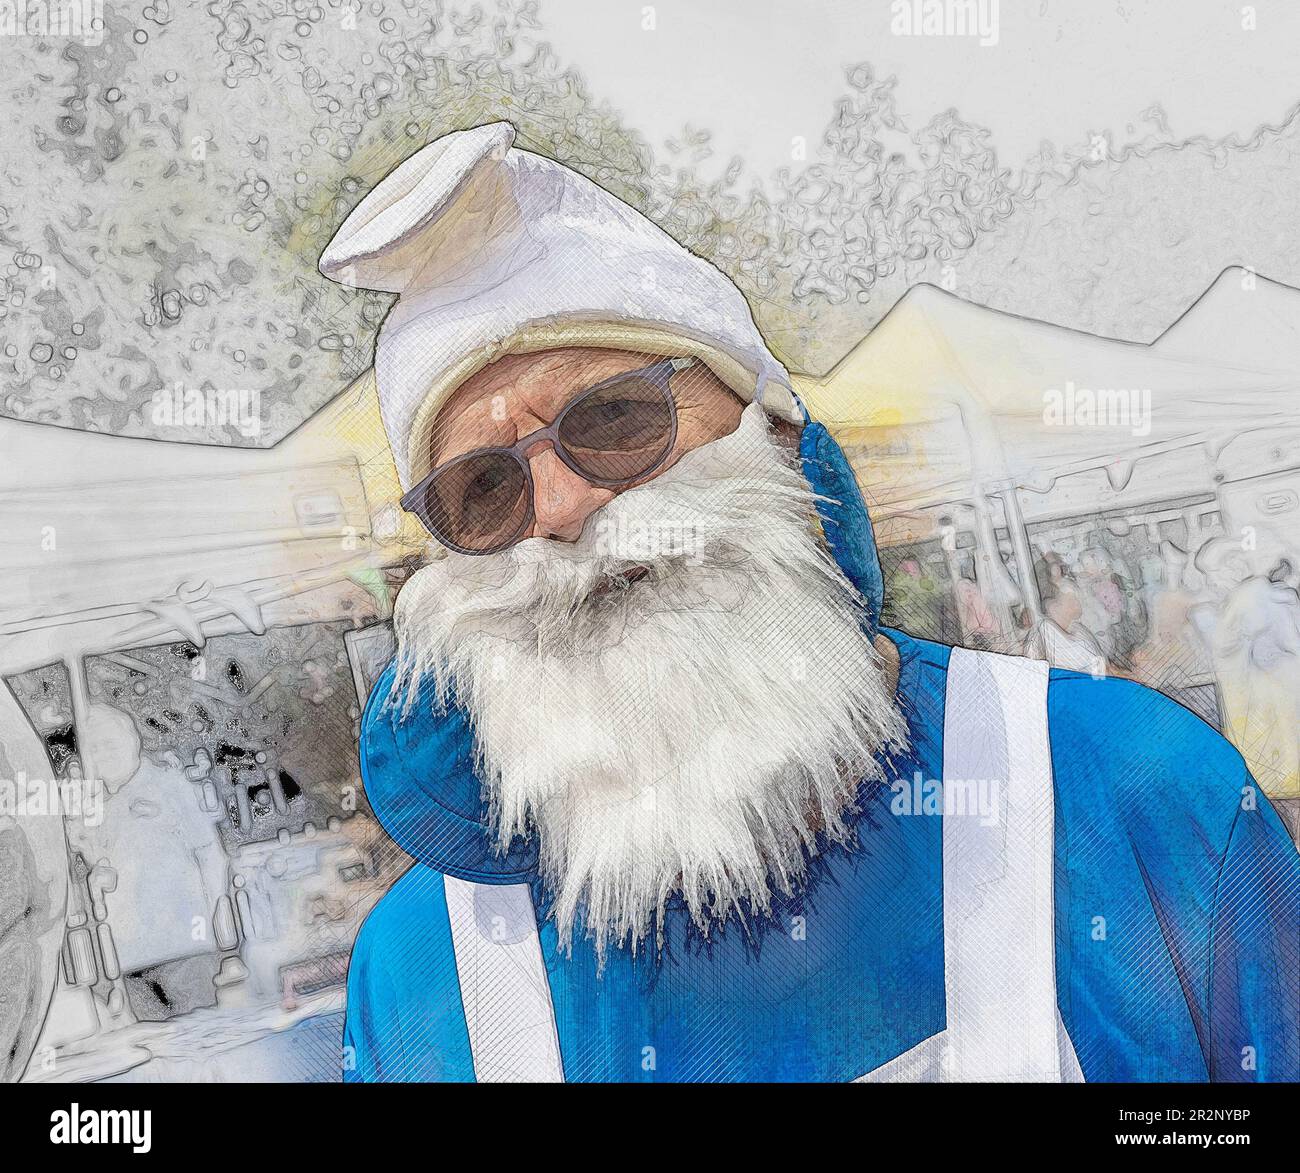 Photoshopped portrait of a man in a Smurf costume Stock Photo